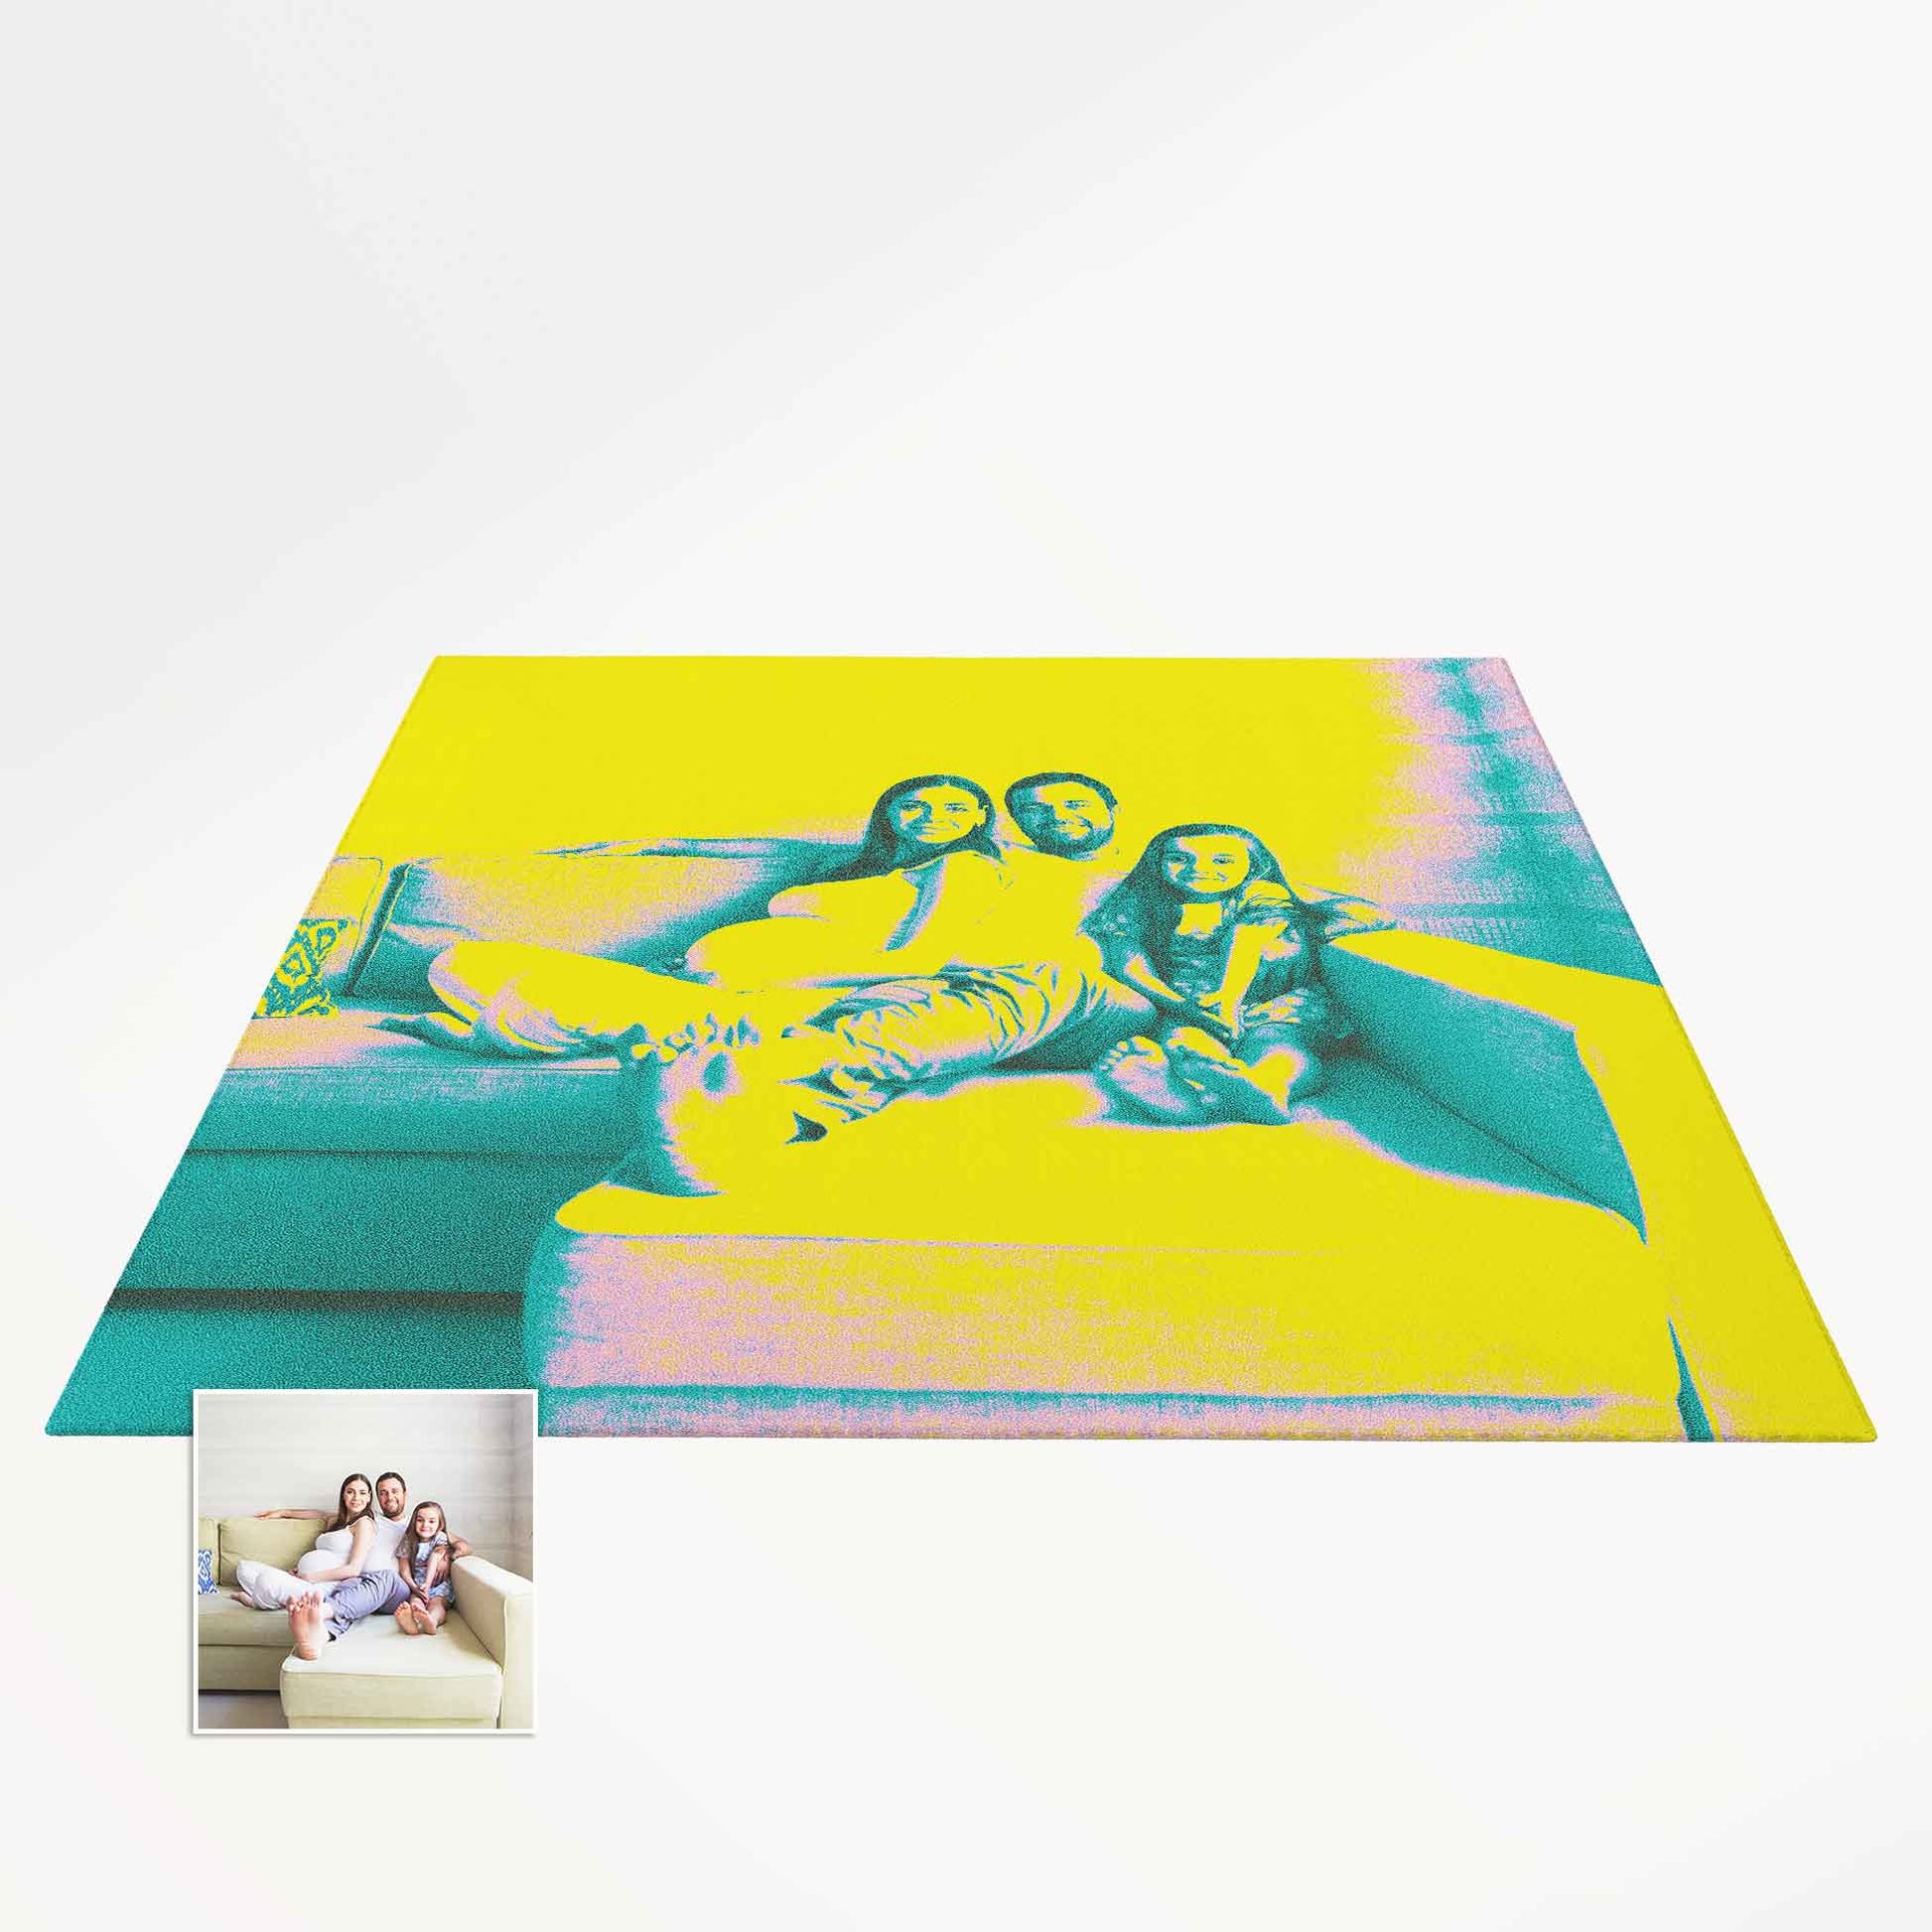 Transform your floors with our Personalised Acid Yellow Photo Rug. Customisable and eye-catching, it's sure to be a conversation starter